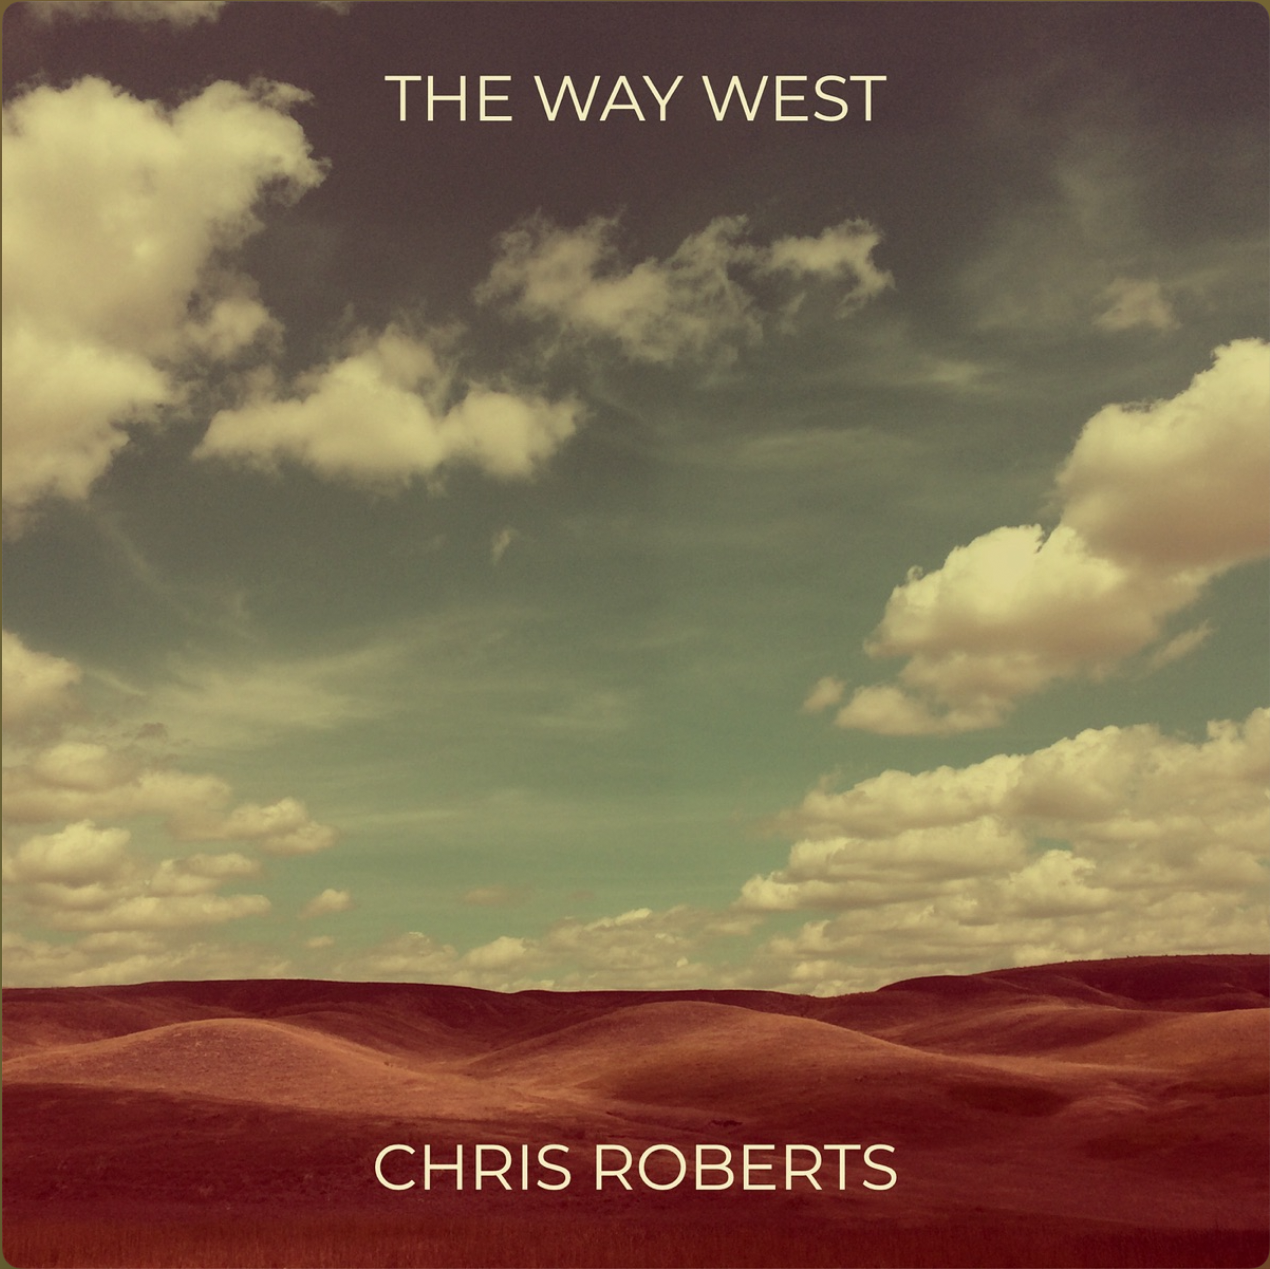 Album Review: Chris Roberts “The Way West” (2023 Edition)